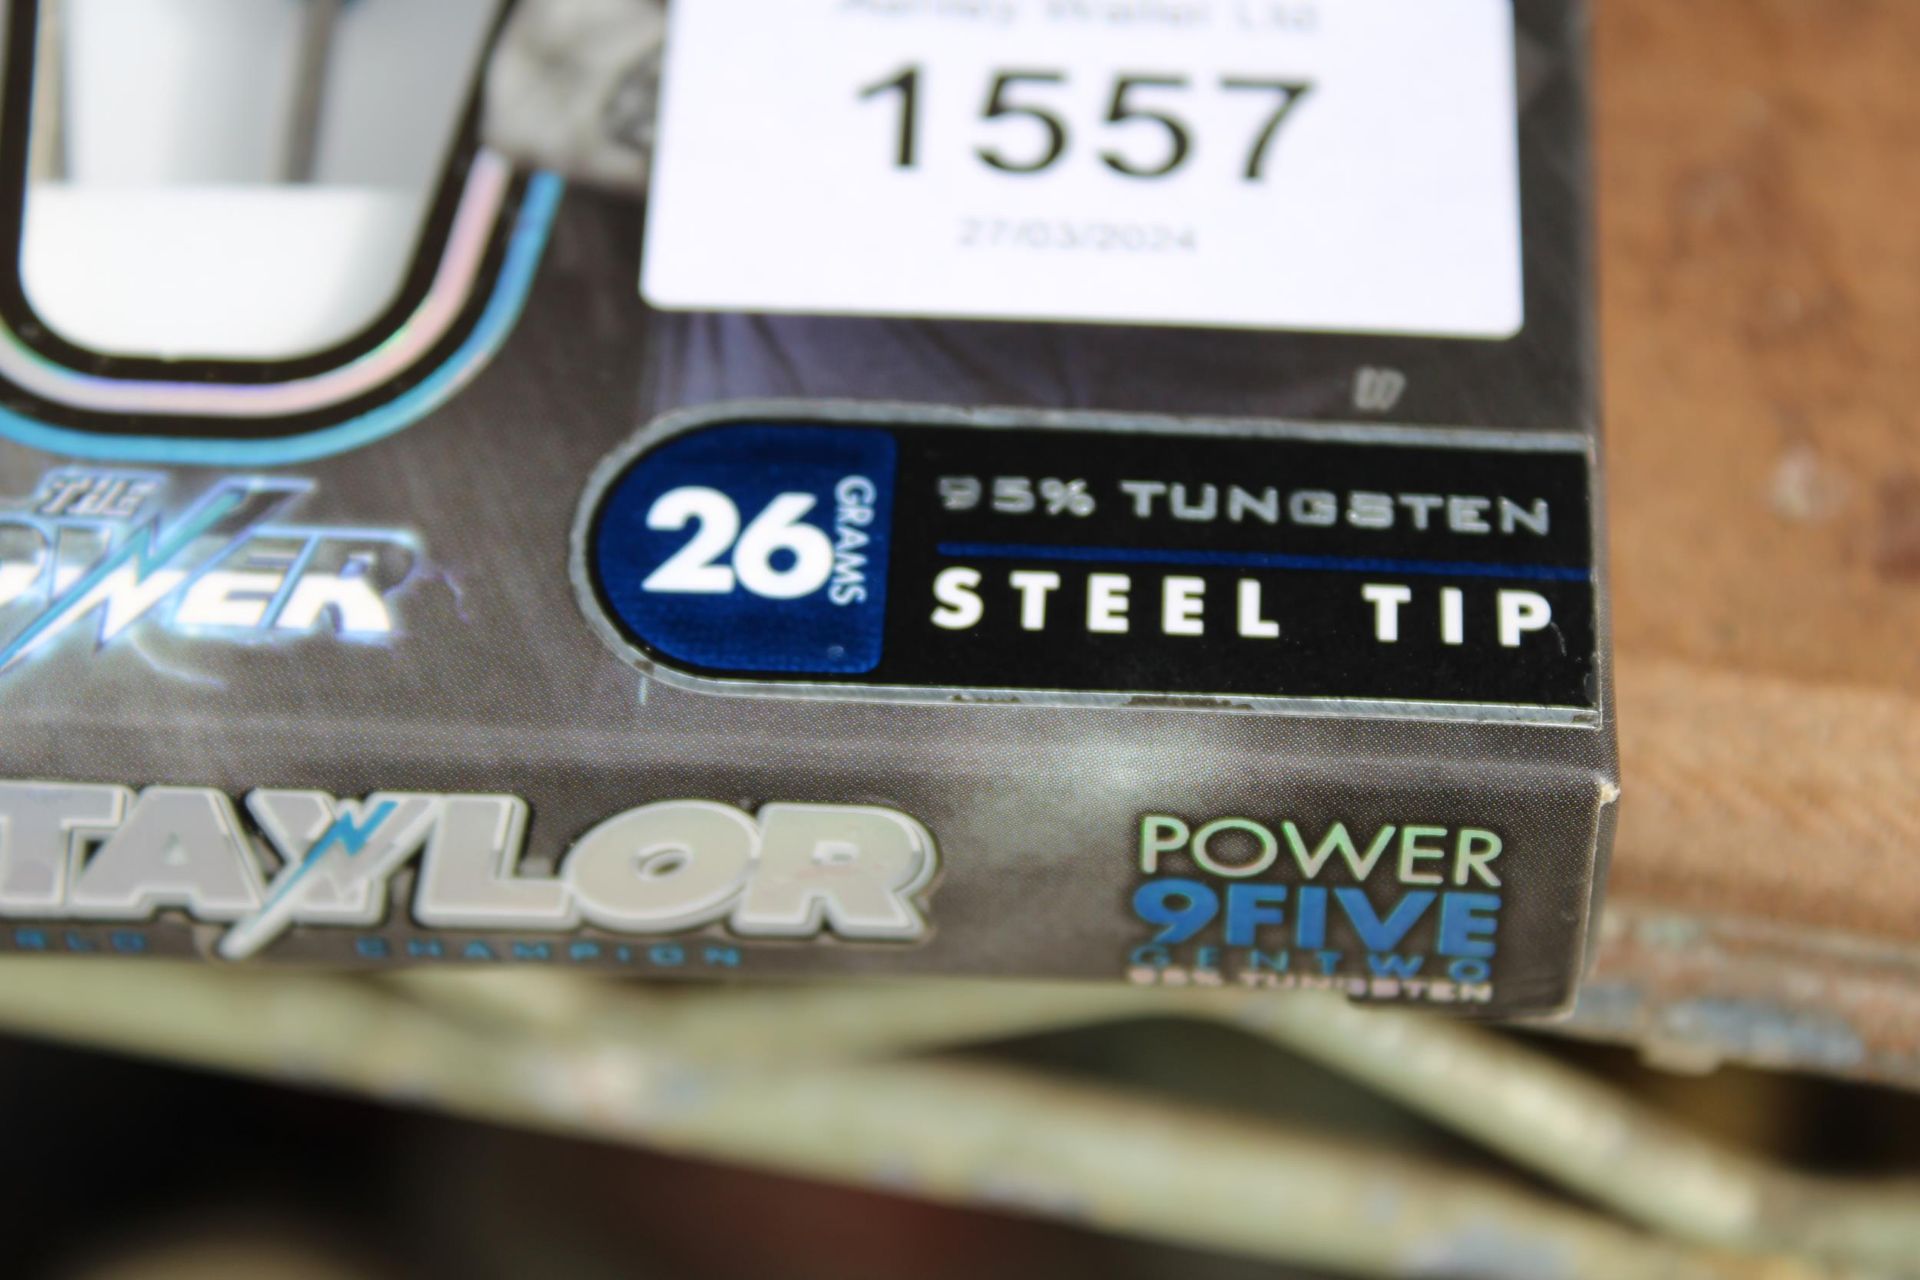 A SET OF BRAND NEW AND BOXED PHIL TAYLOR POWER-9FIVE GENERATION TWO POWER SHAFT 26G 95% TUNGSTEN - Image 2 of 4